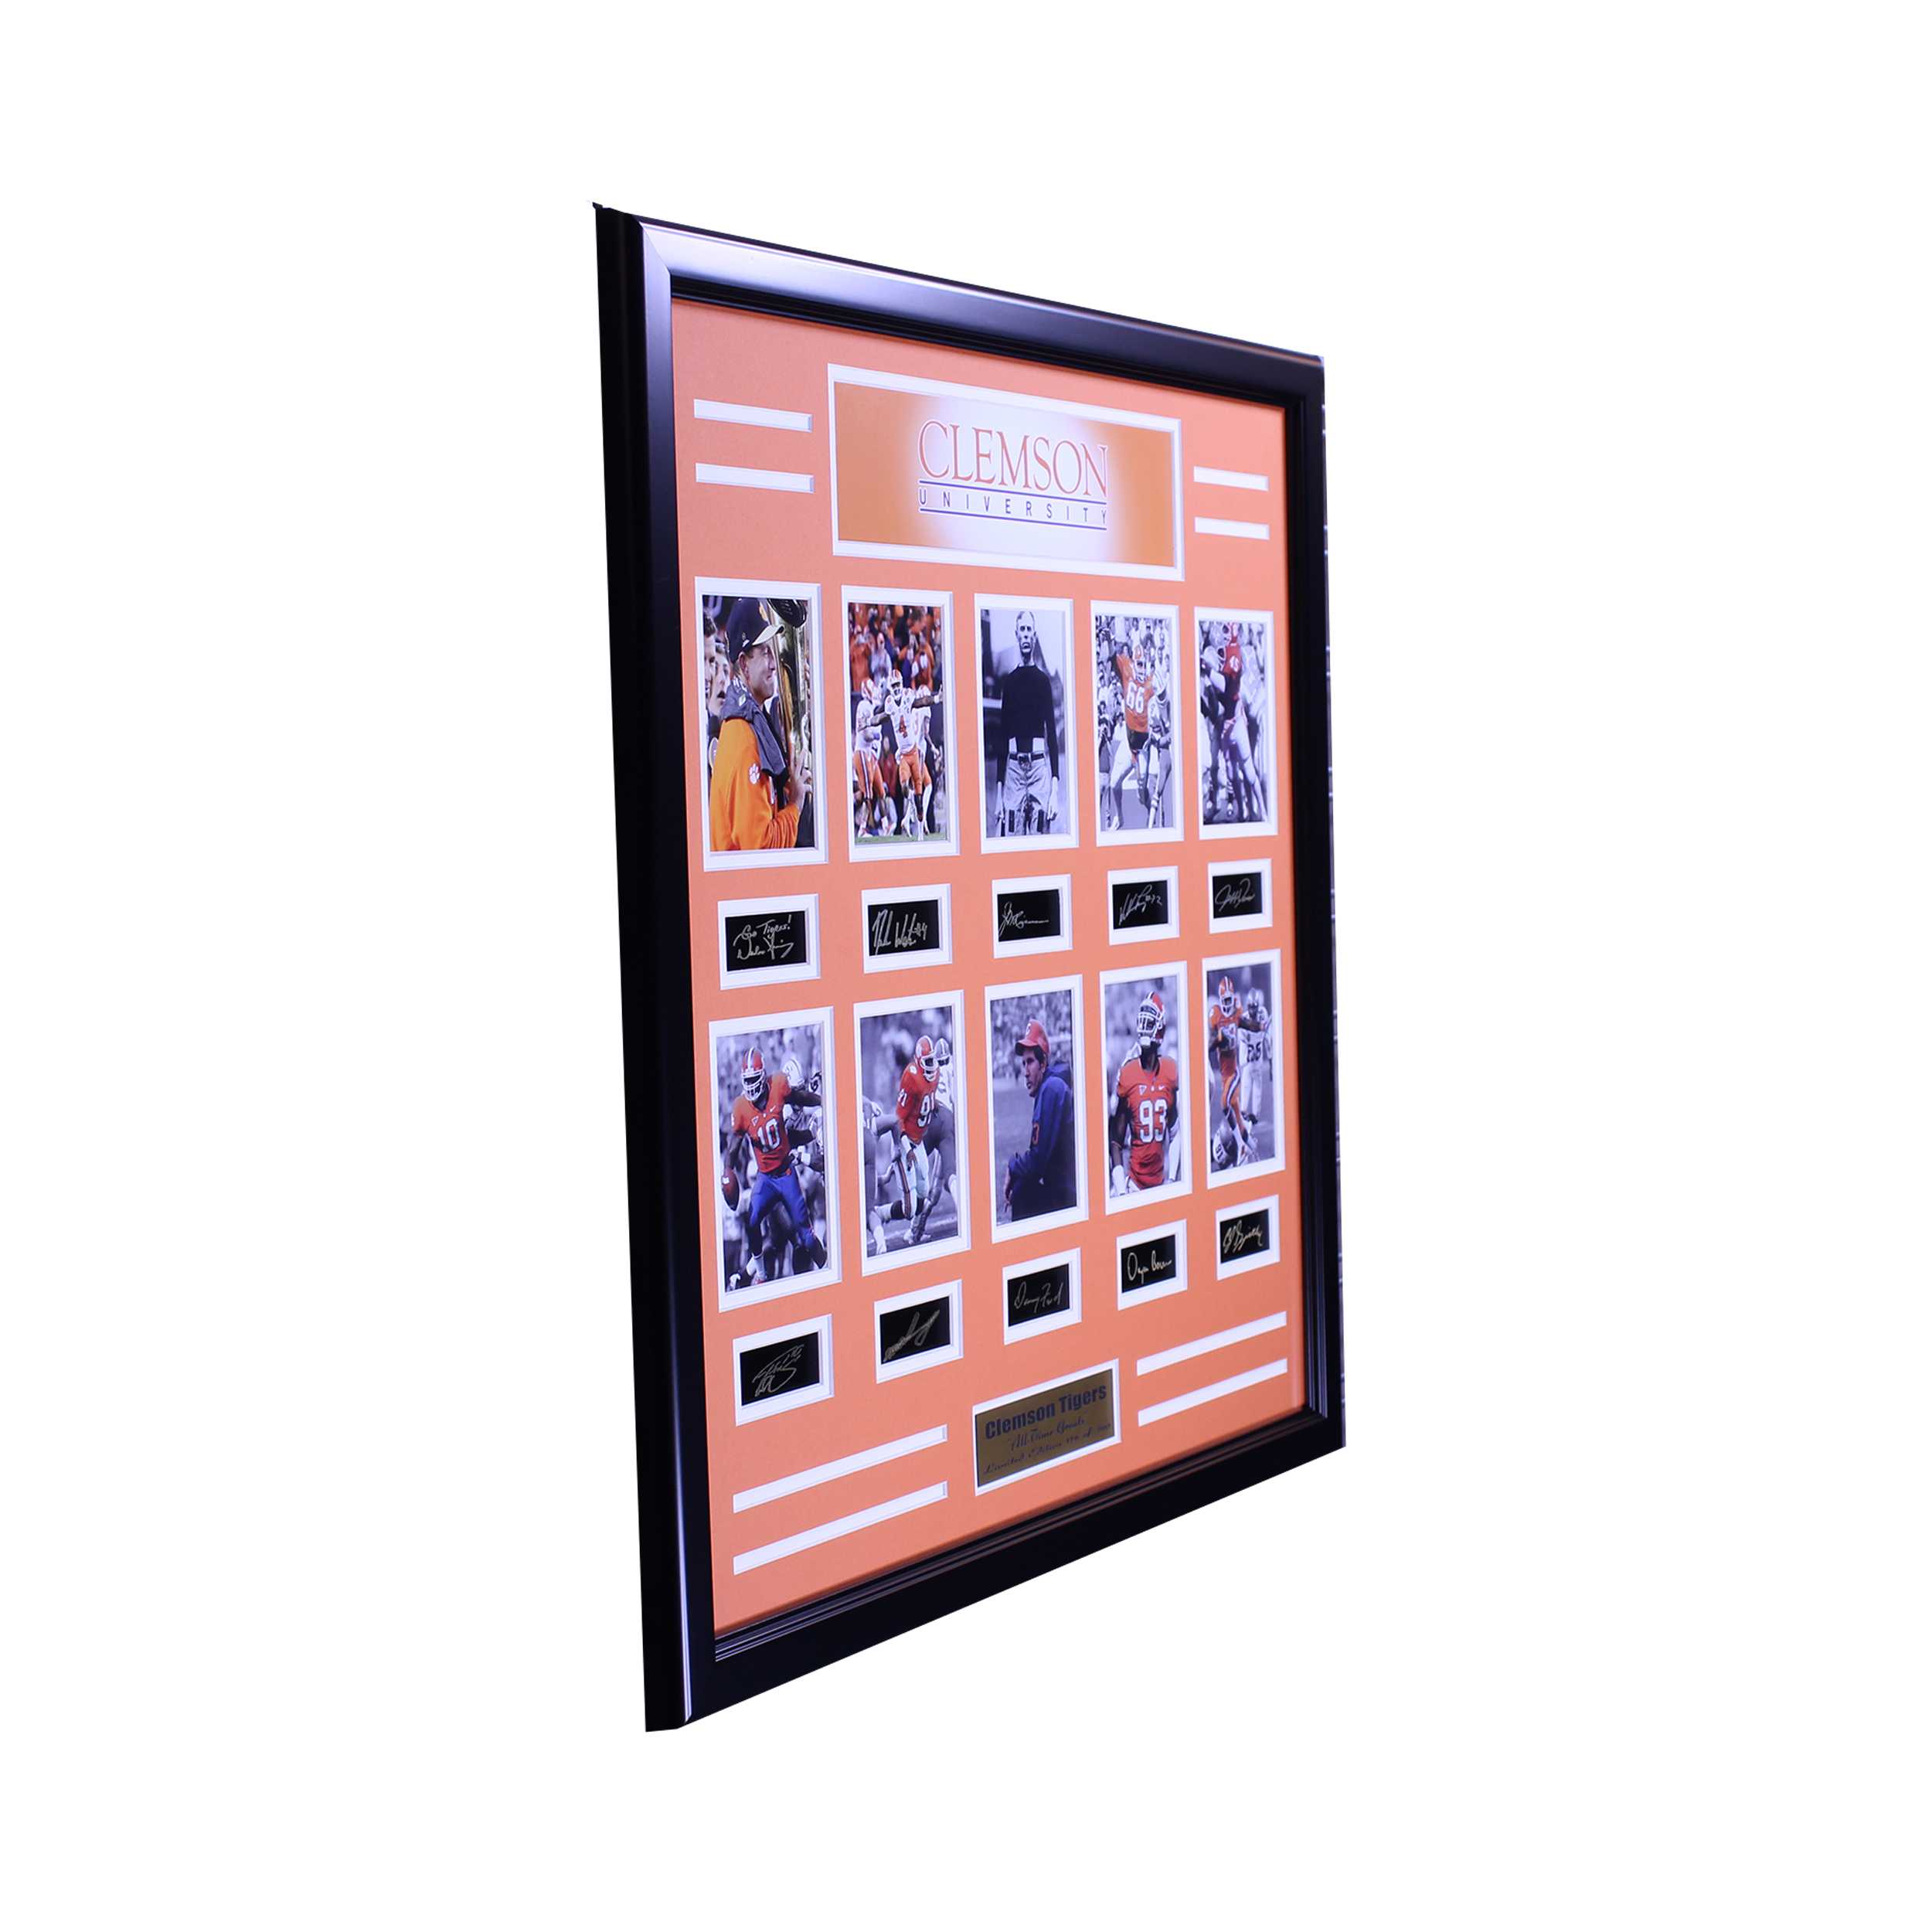 CLEMSON TIGERS ALL TIME GREATS ENGRAVED SIGNATURE LARGE FRAME